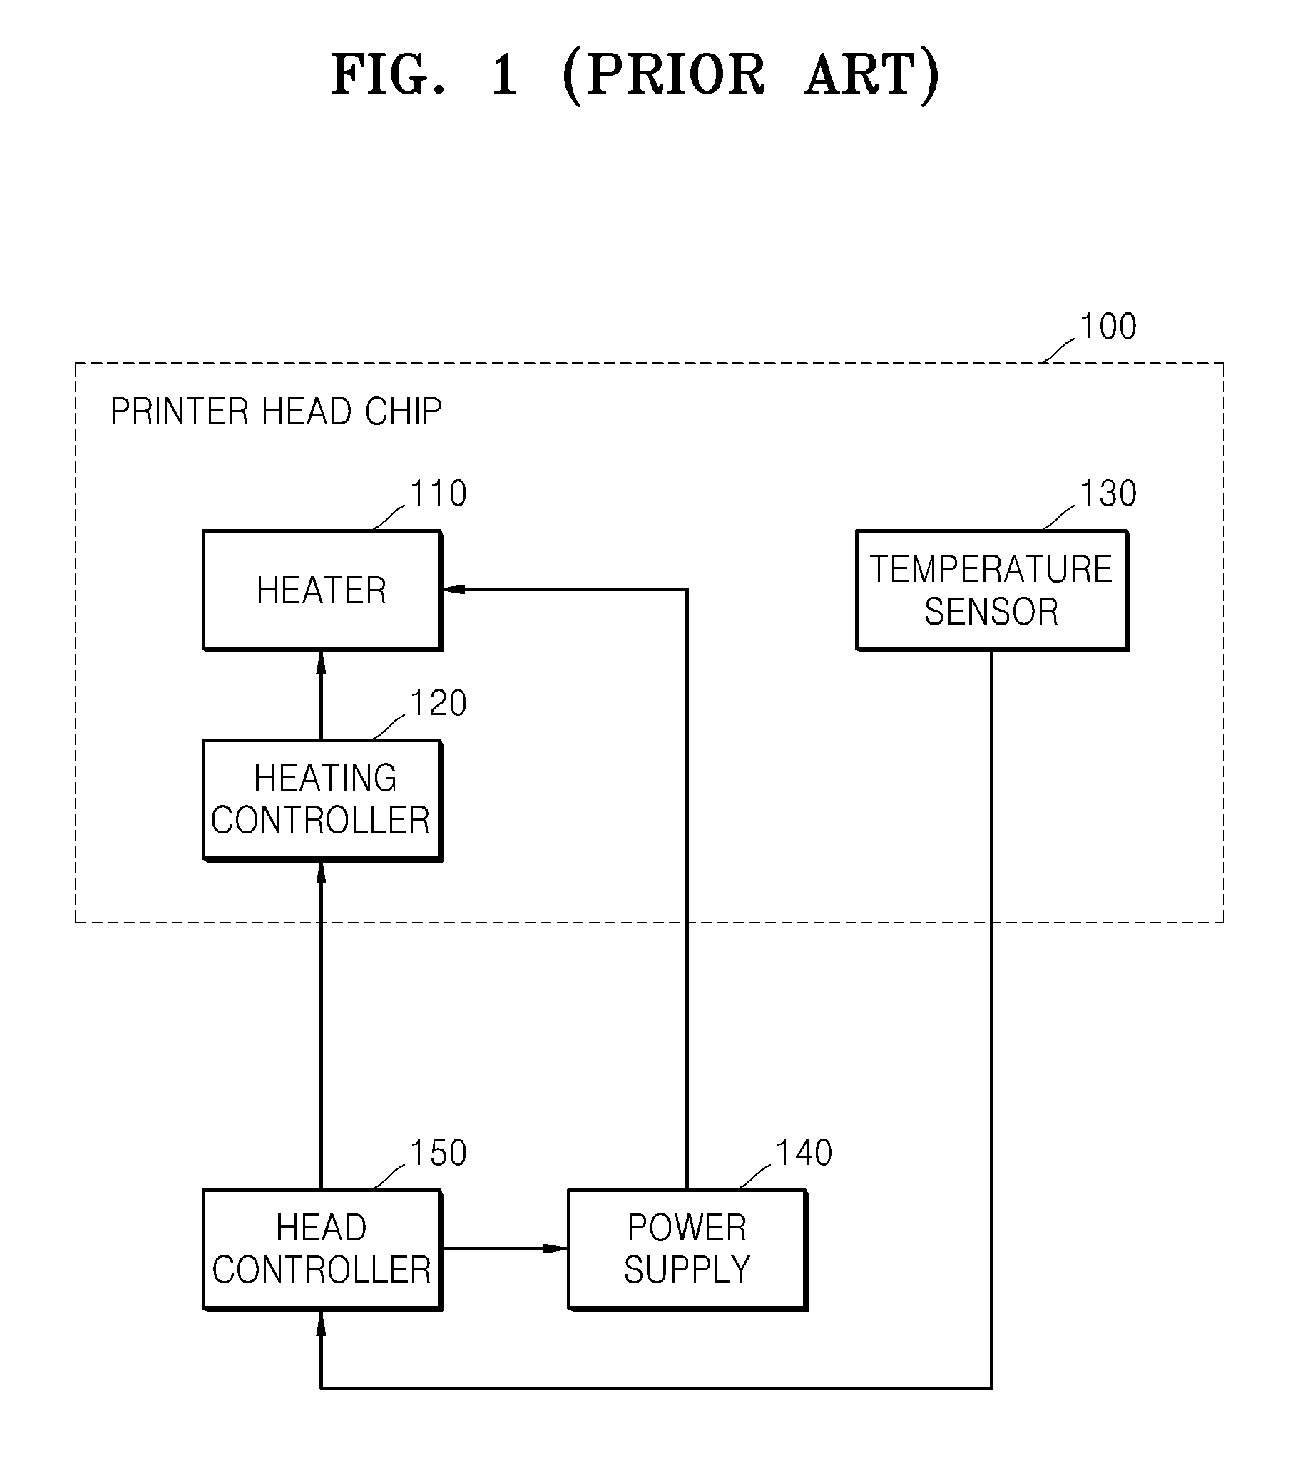 Method and apparatus to control a temperature of a printer head chip